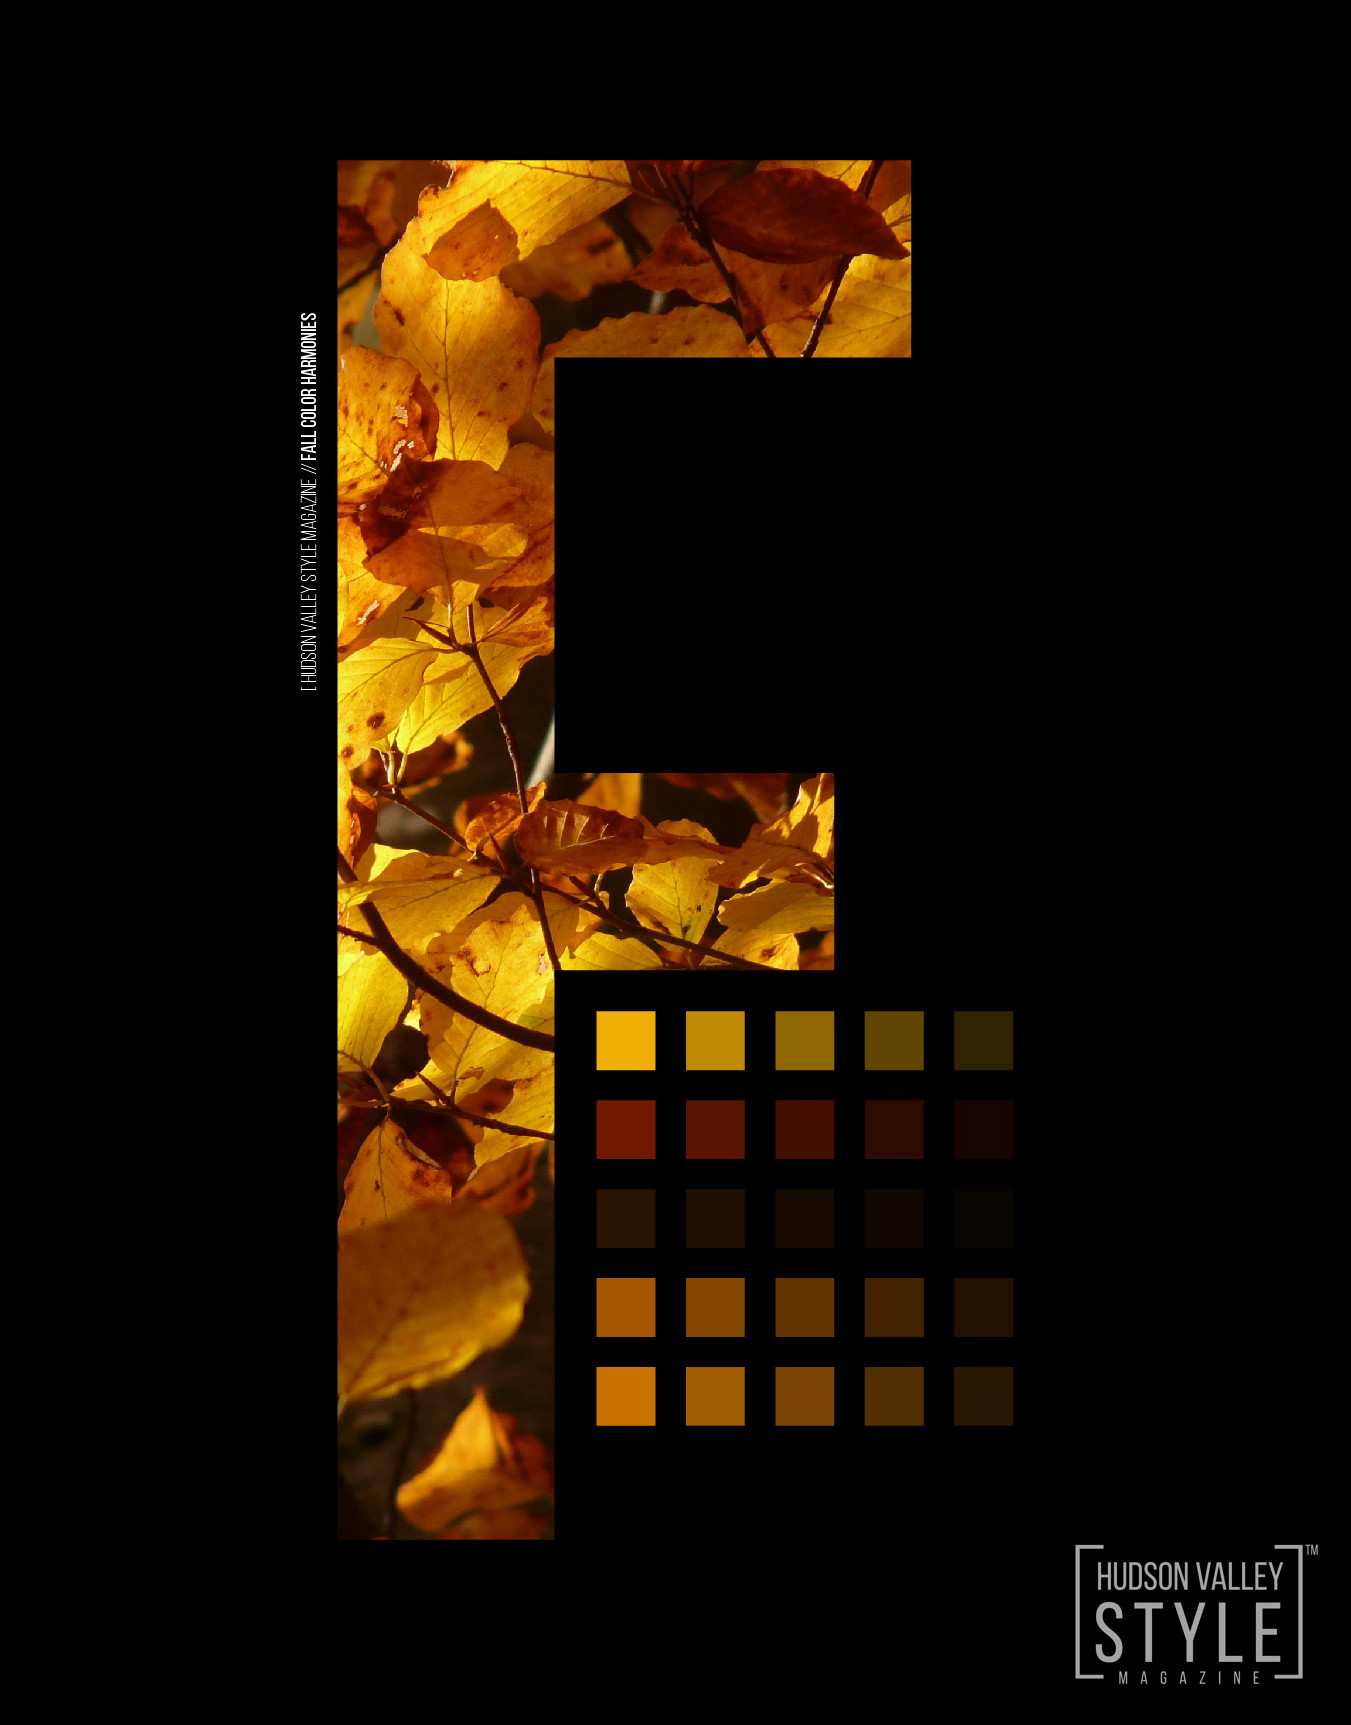 Hudson Valley Style Magazine / Fall Color Harmonies/ Maxwell Alexander Design / Typography / Graphic Design